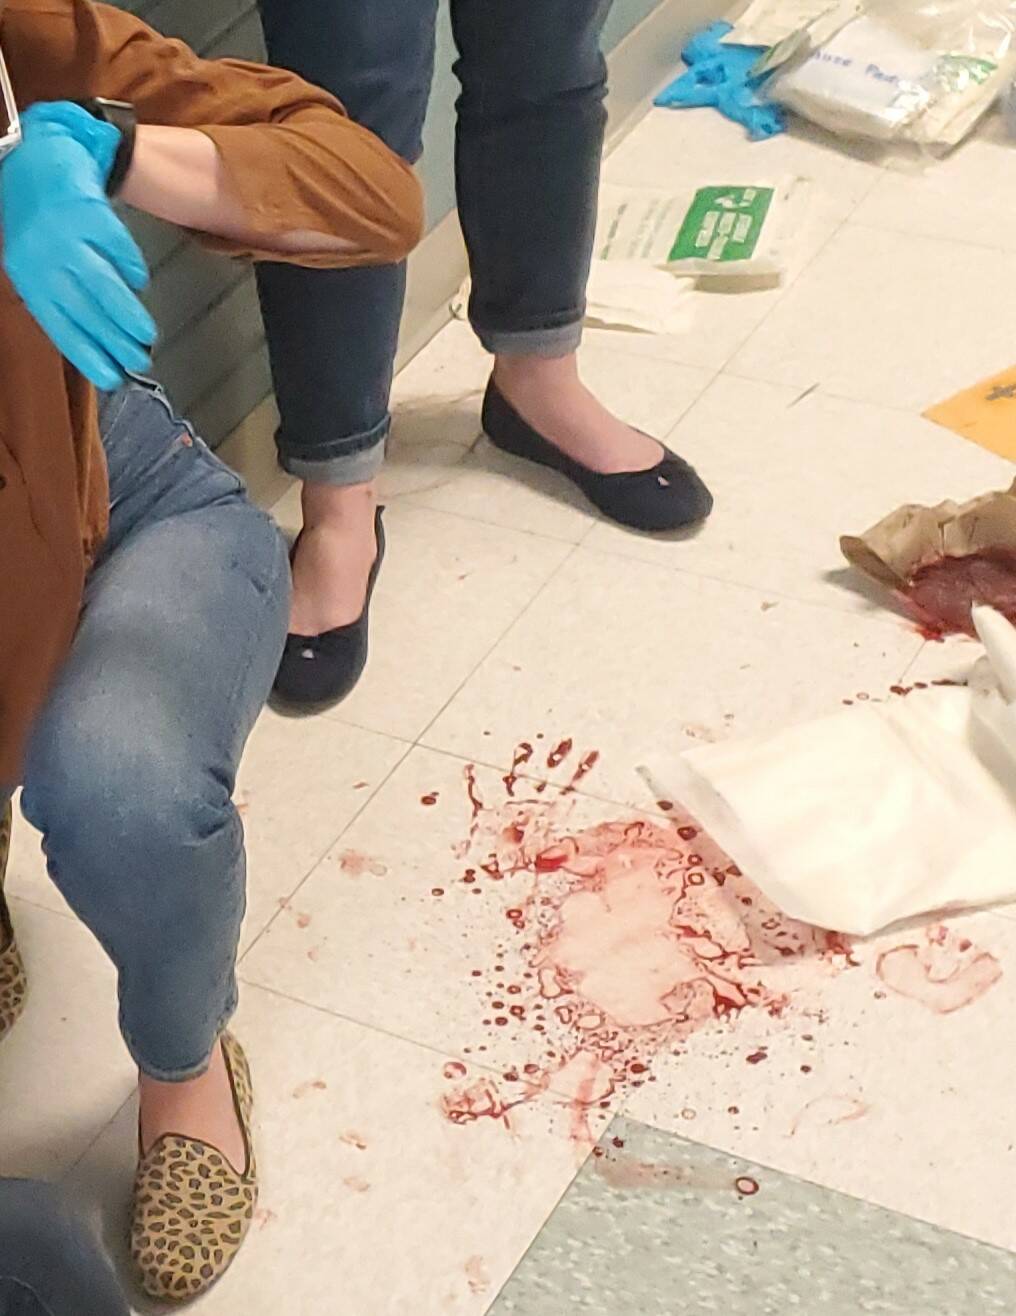 The scene of the March 30 attack on a teacher at Dimmitt Middle School in the Renton School District. (Courtesy of King County Sheriff's Office public records.)